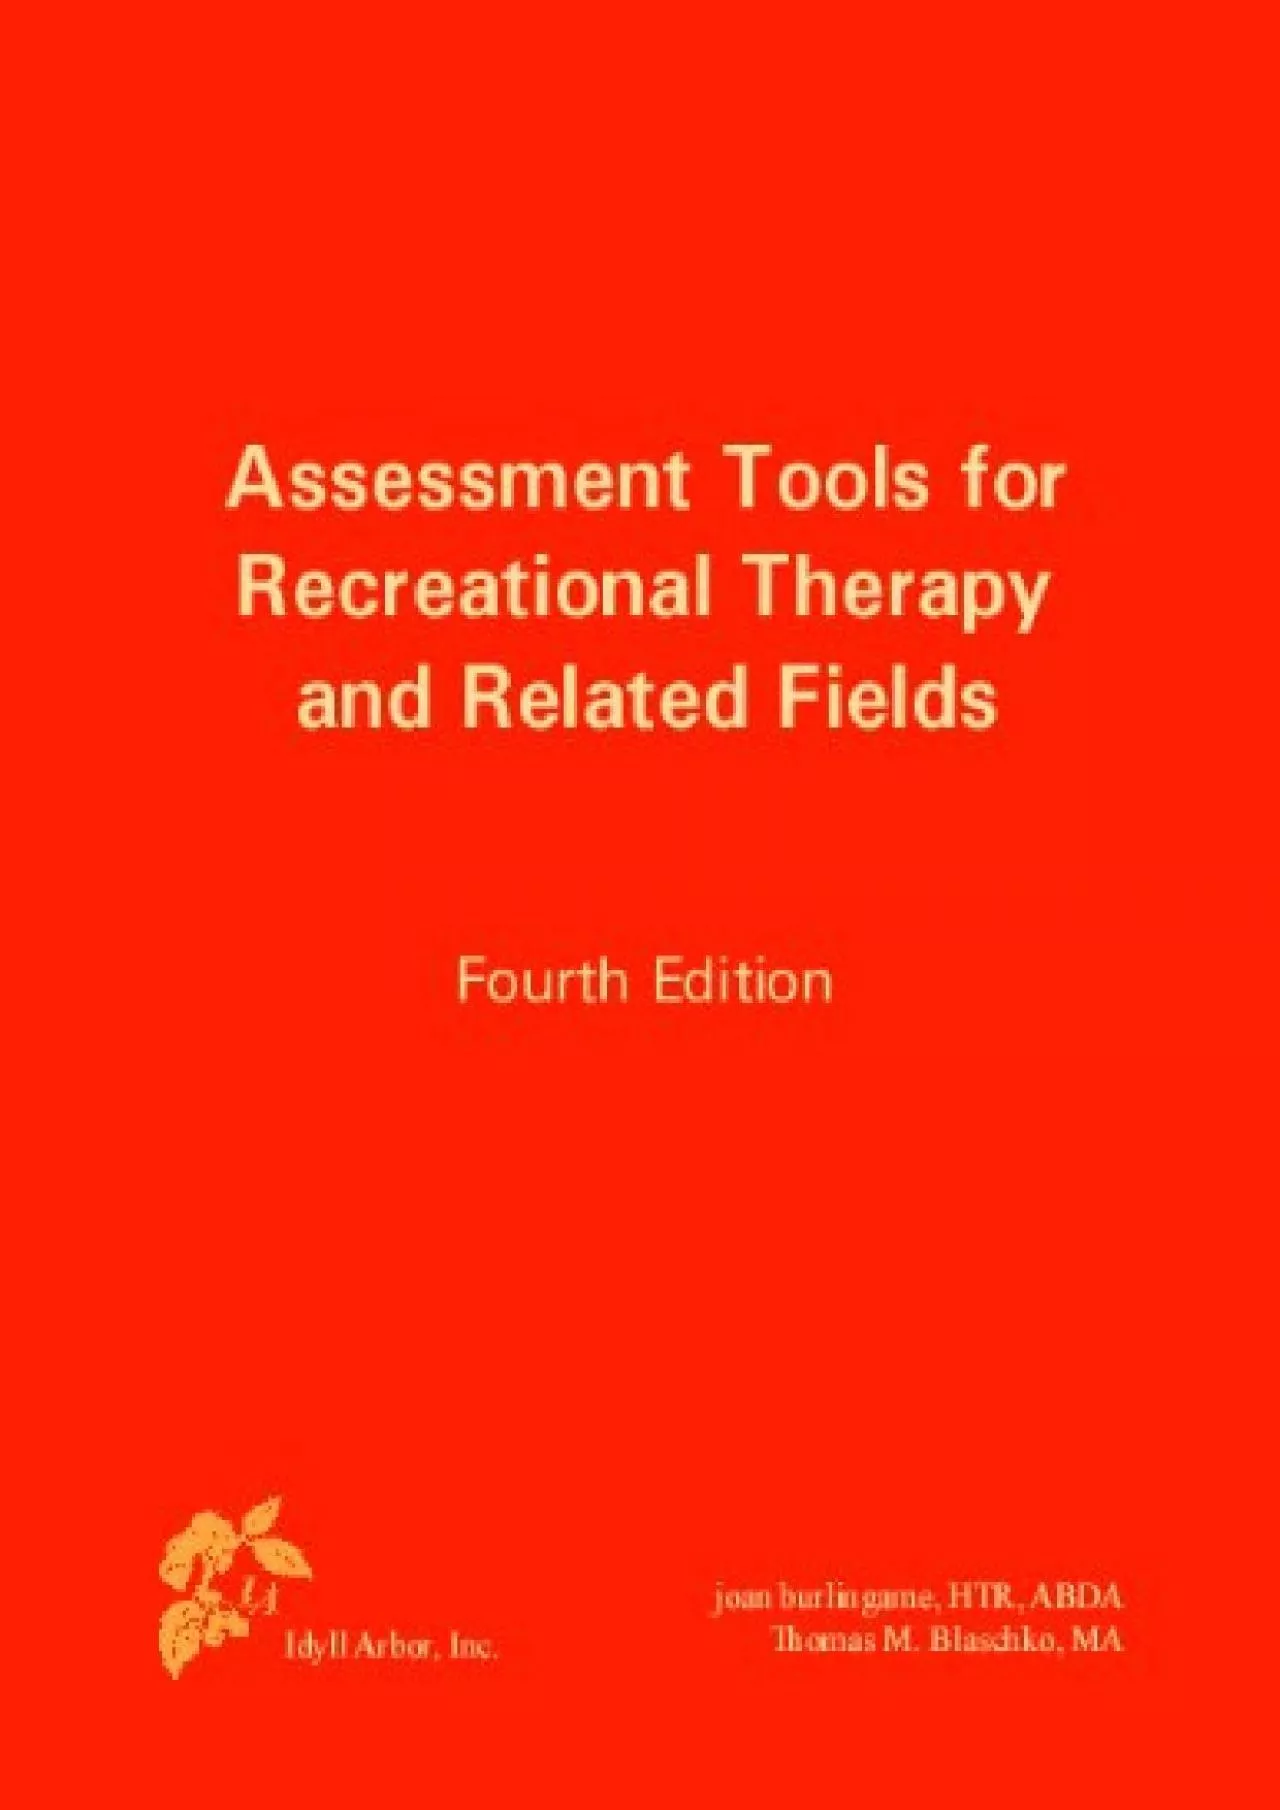 (EBOOK)-Assessment Tools for Recreational Therapy and Related Fields, 4th Edition